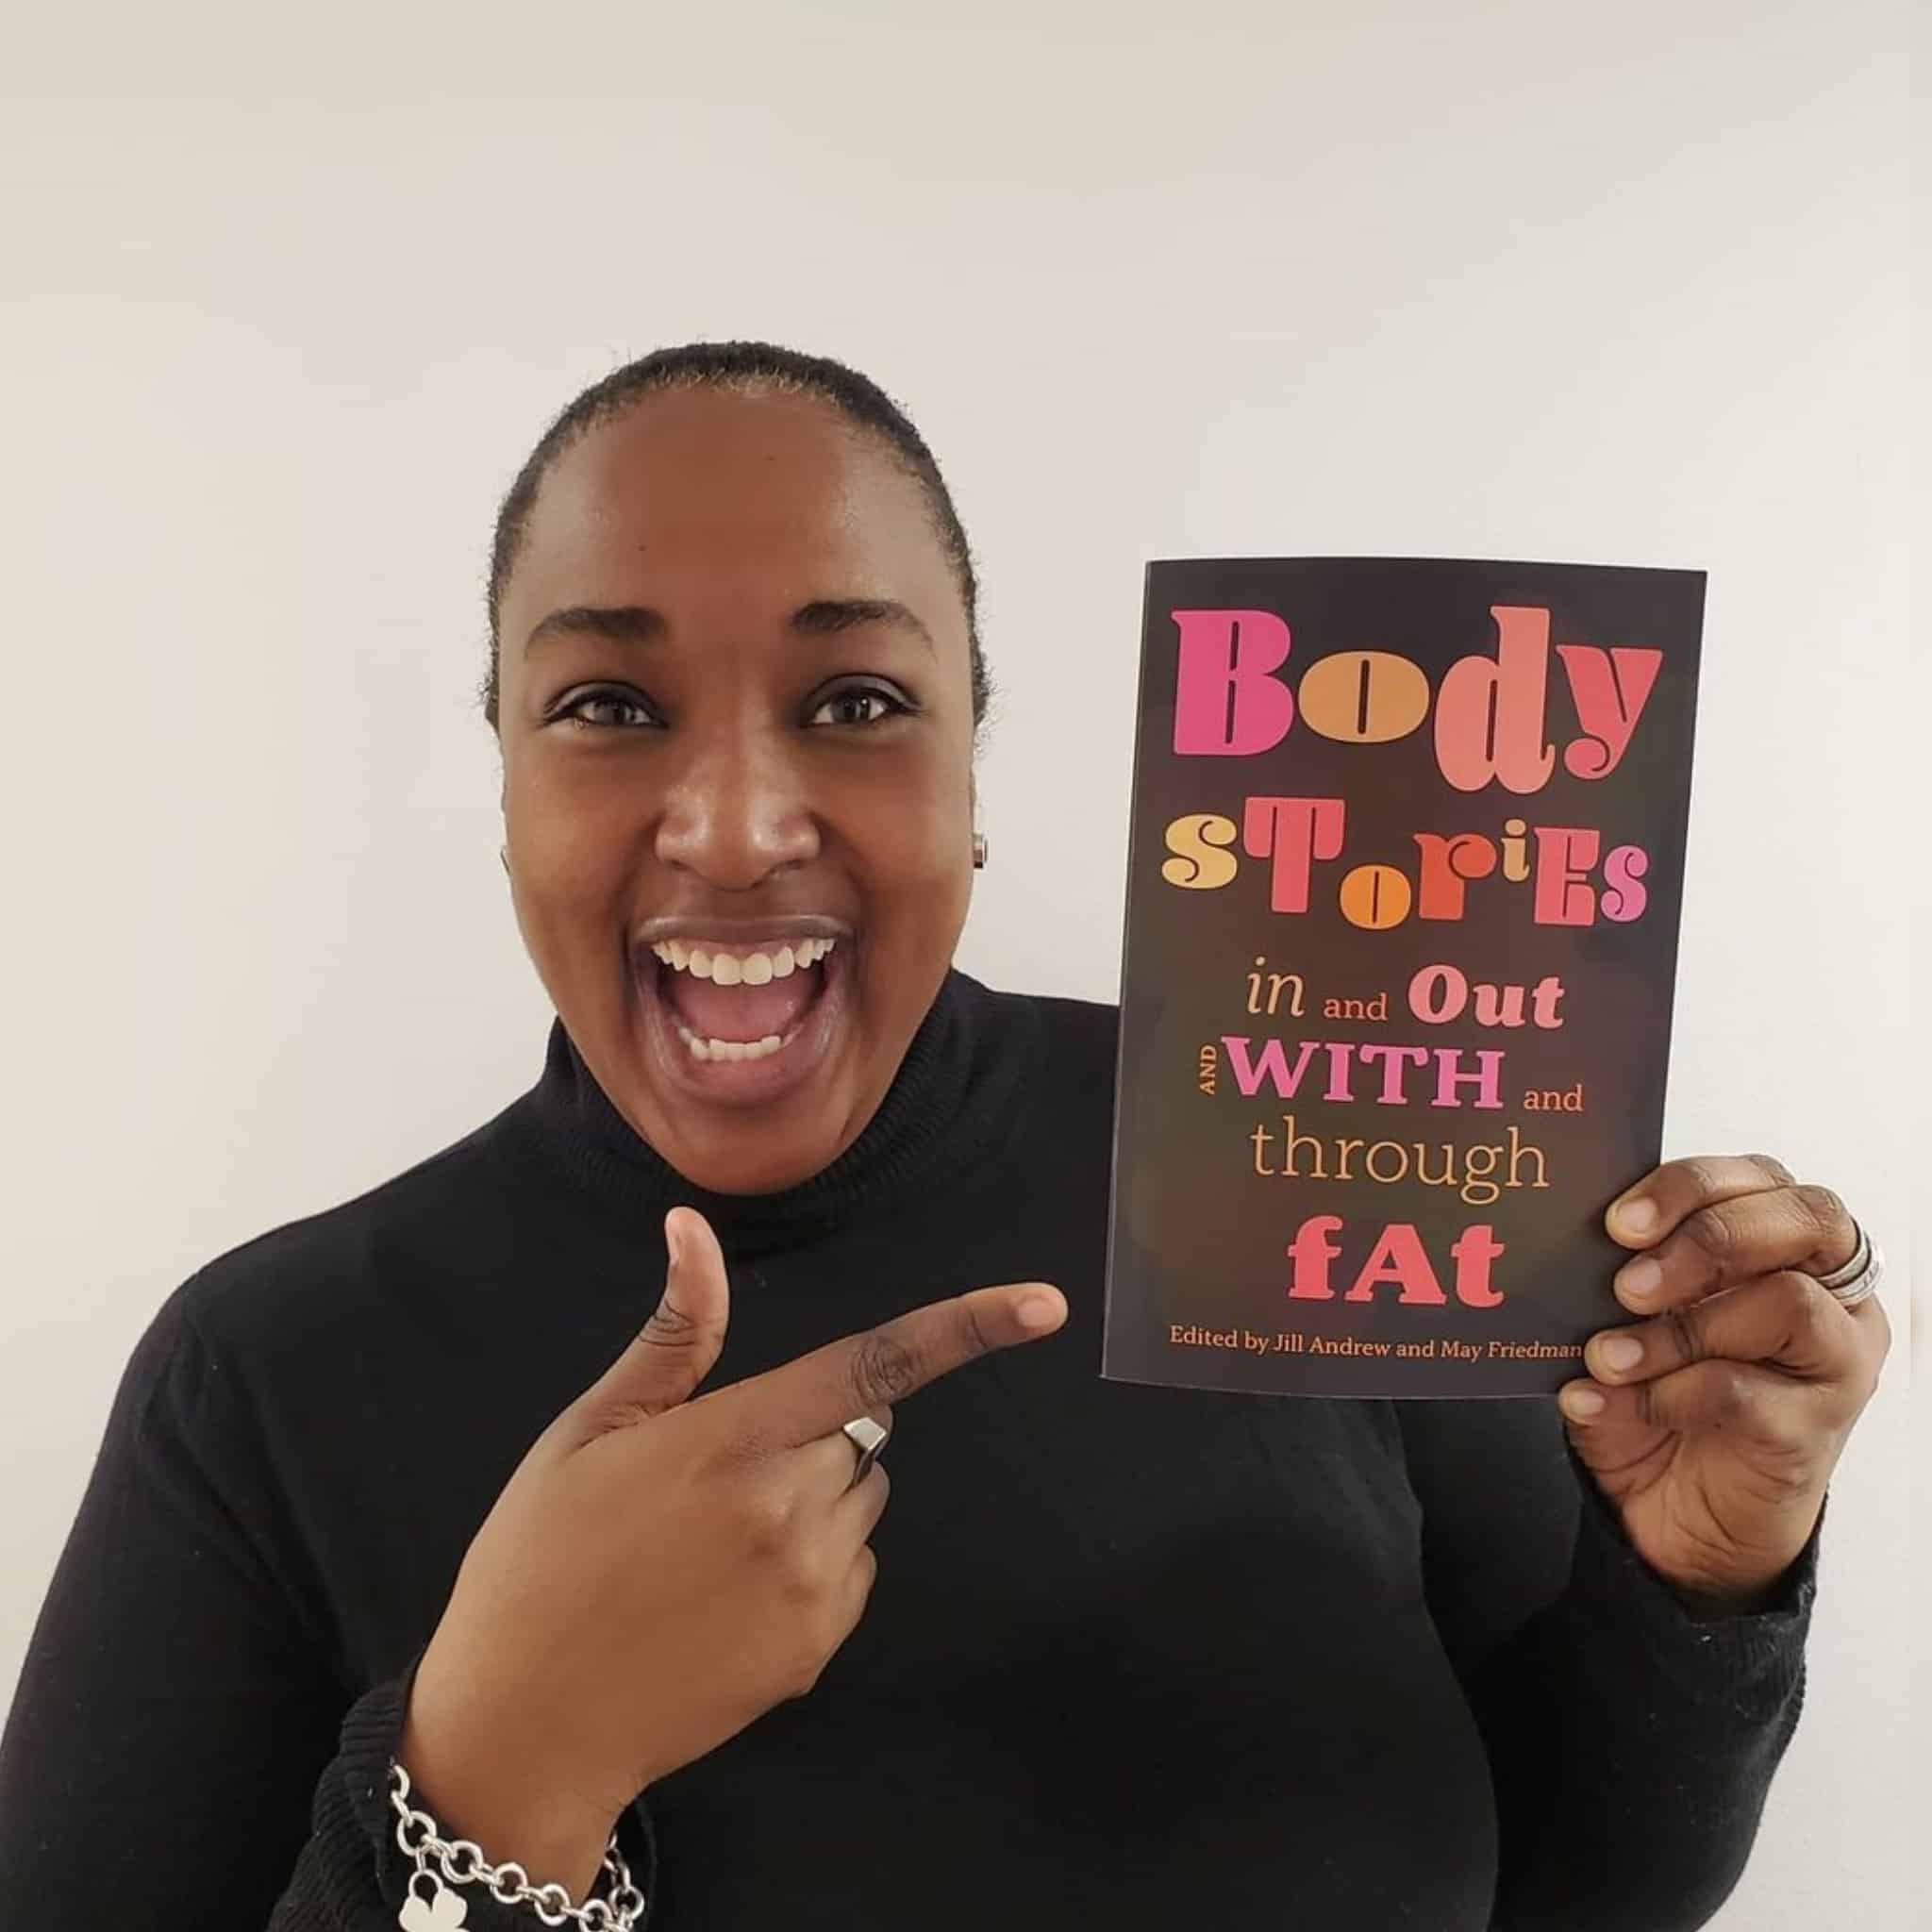 Society needs to STOP BLAMING people for their body size: MPP Jill  Andrew's 'Body Stories' shares about life in a fat-hating world